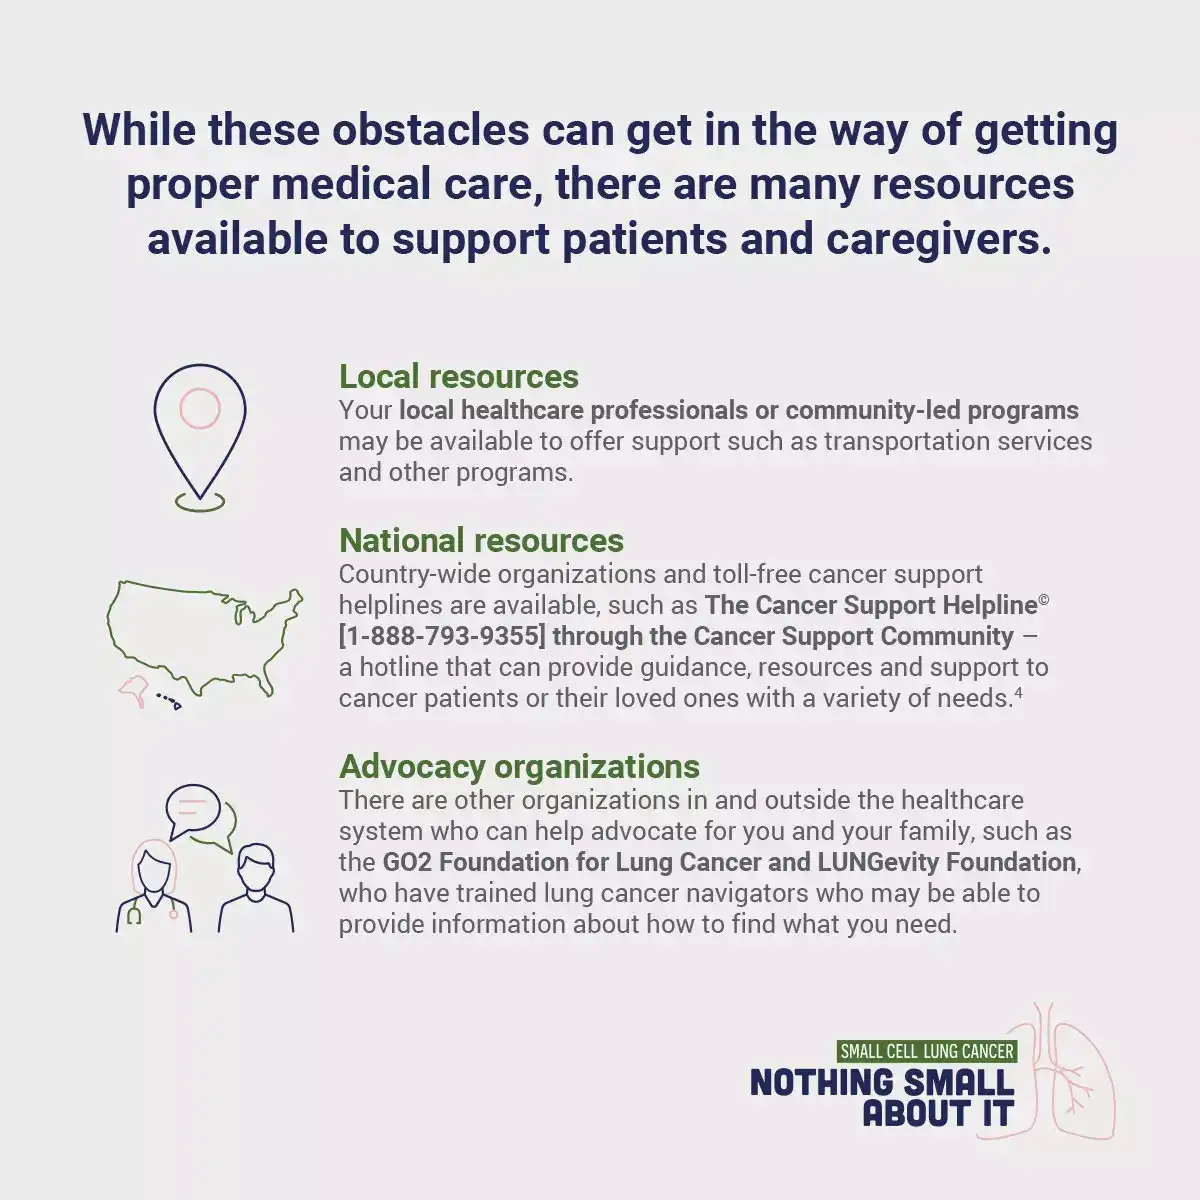 Resources for Patients and Caregivers